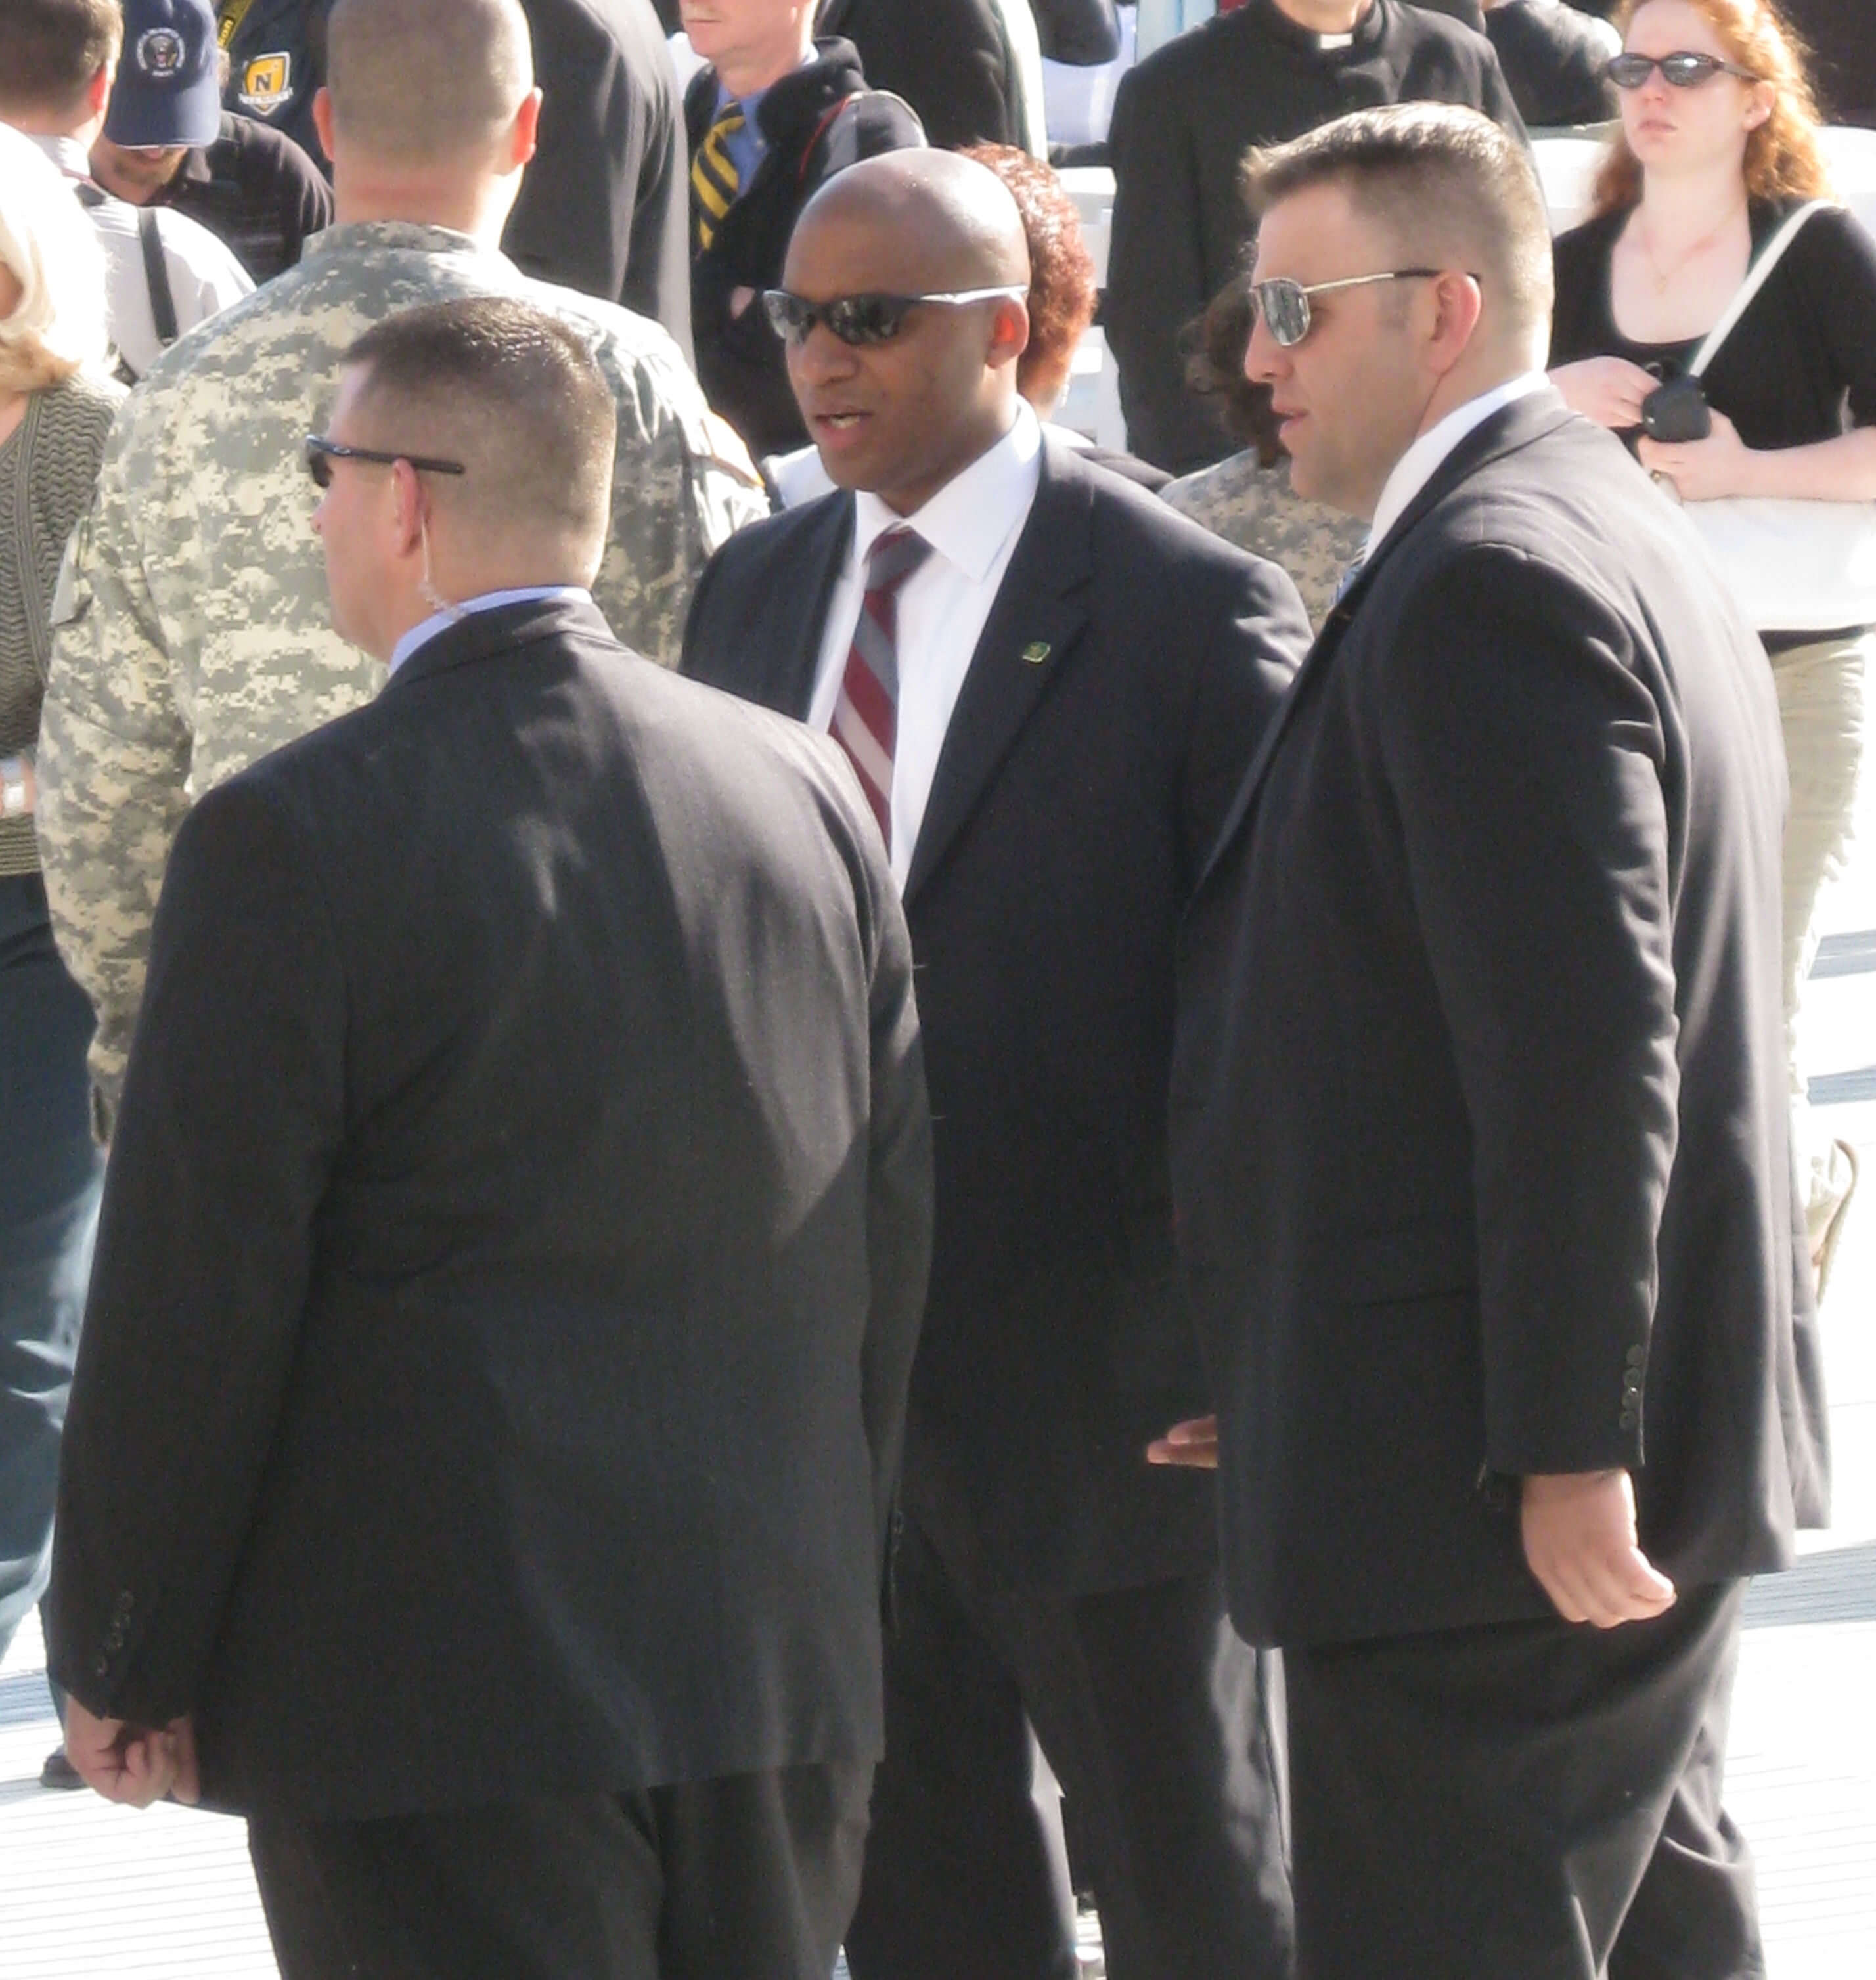 Secret Service Agents Sent Home After Night of Drinking